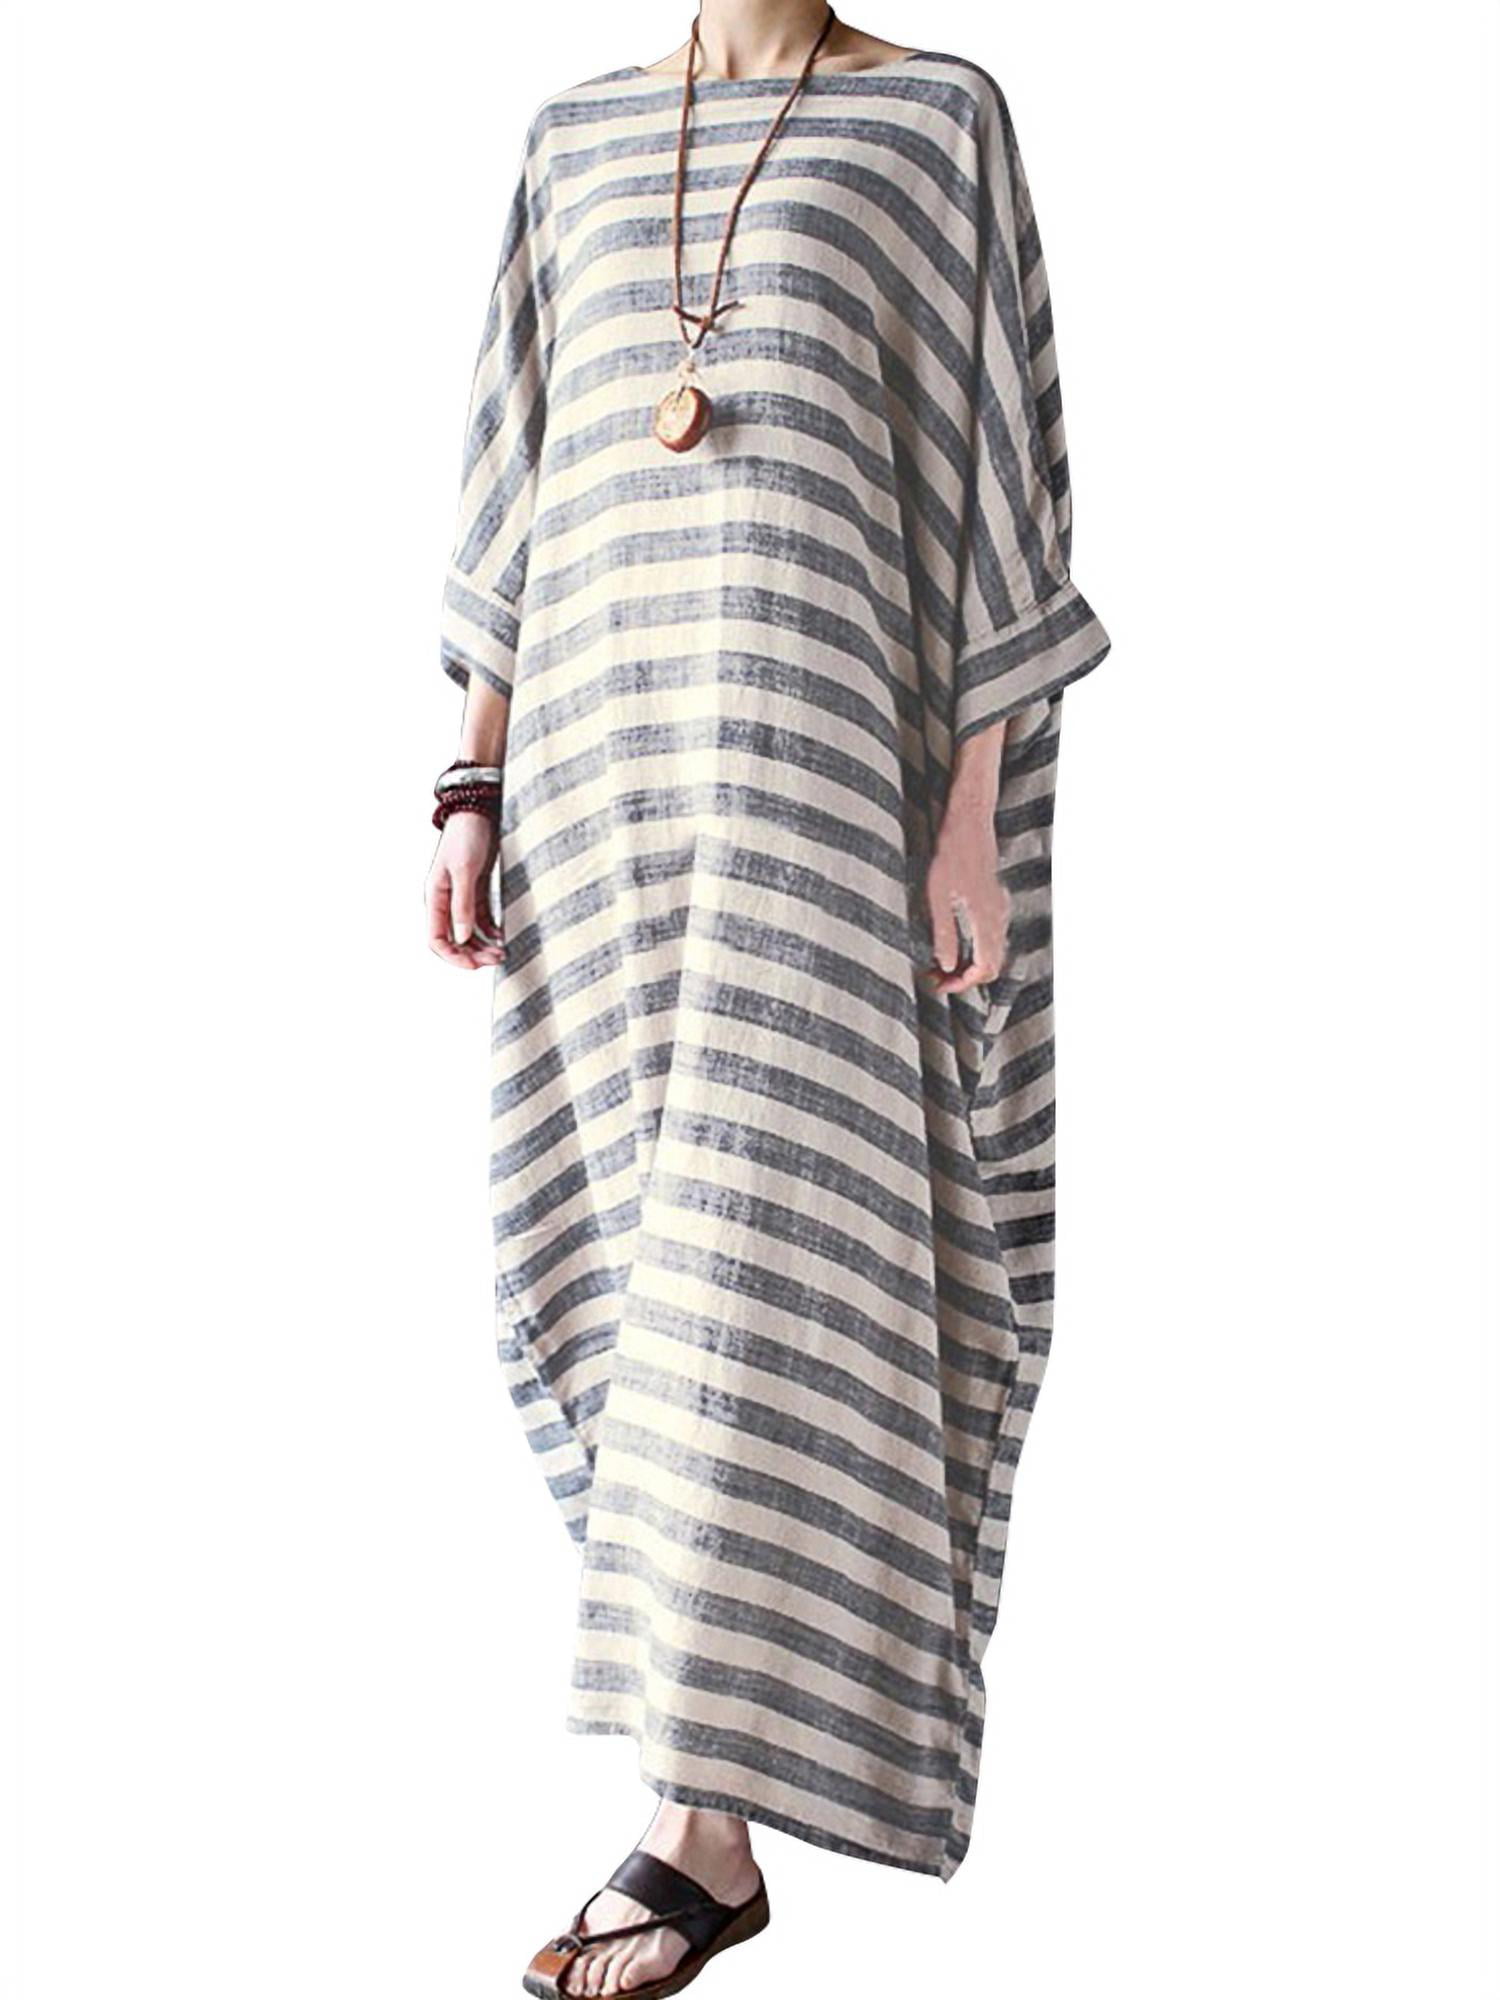 Womens Ankle/Knee Length Kaftan African Dashiki Cotton Dress One Size Dif Style